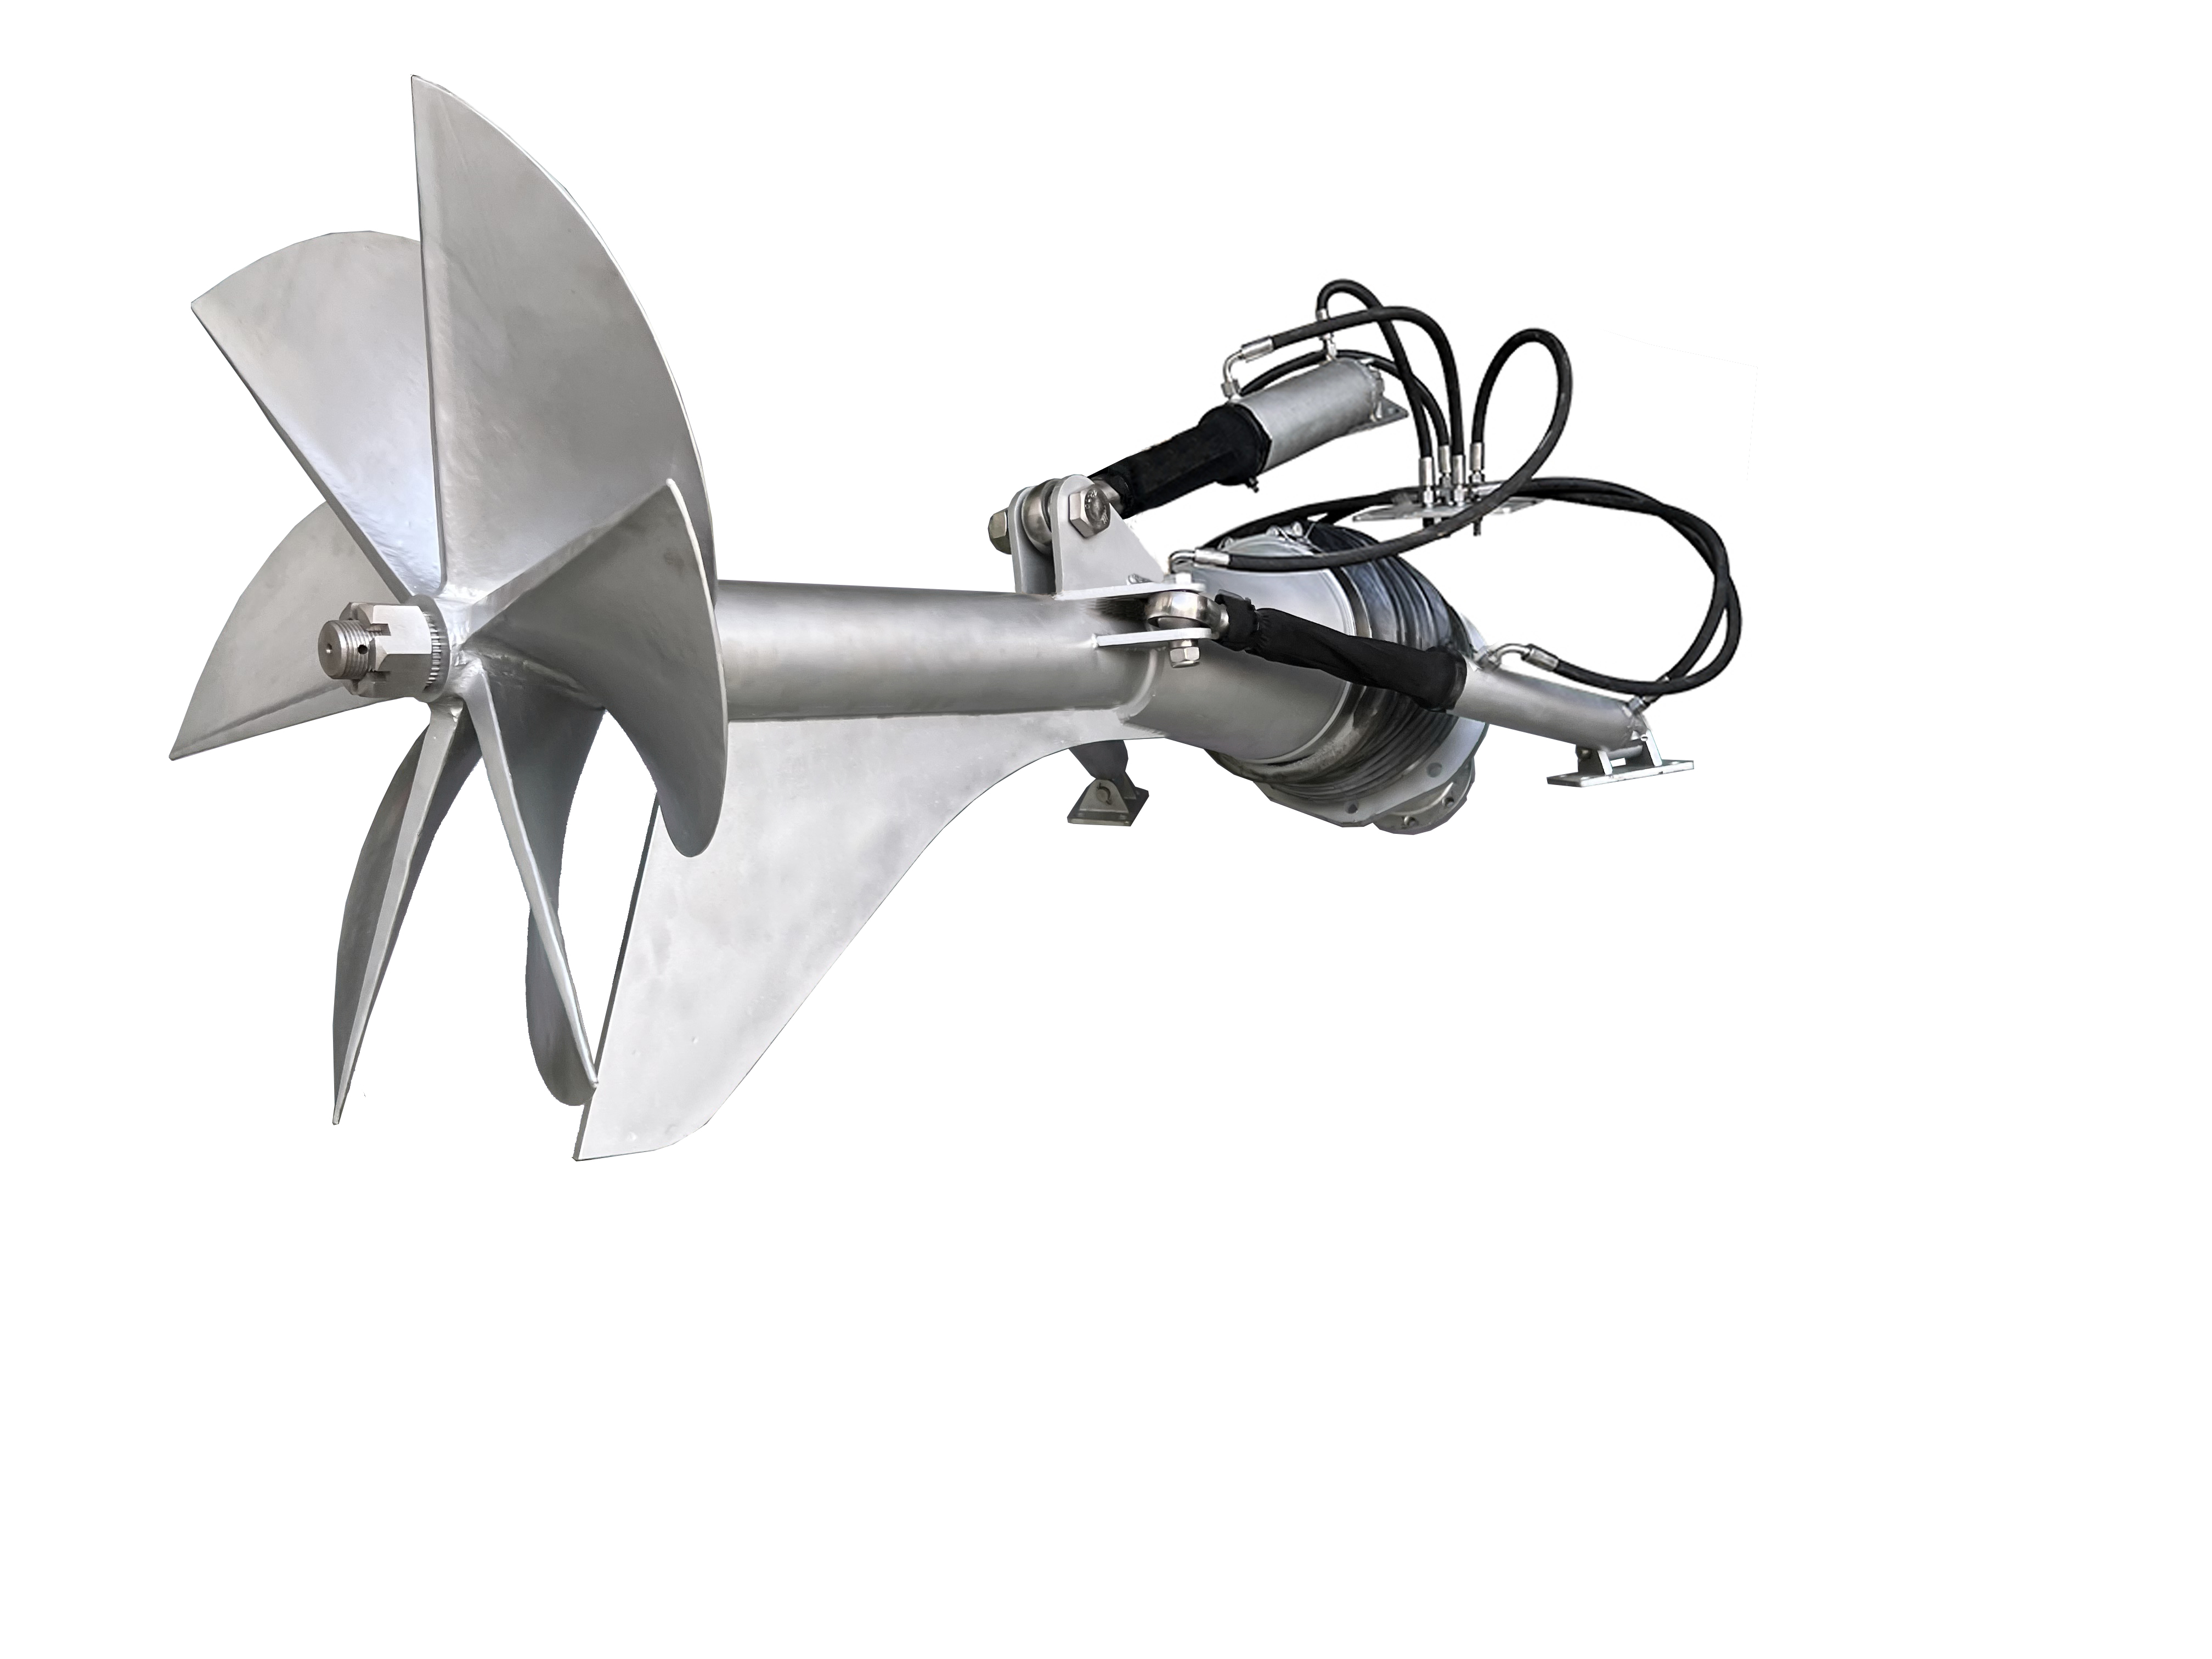 BH450 130Horsepower Marine Propulsion System Boat Thruster High Performance Surface Drive